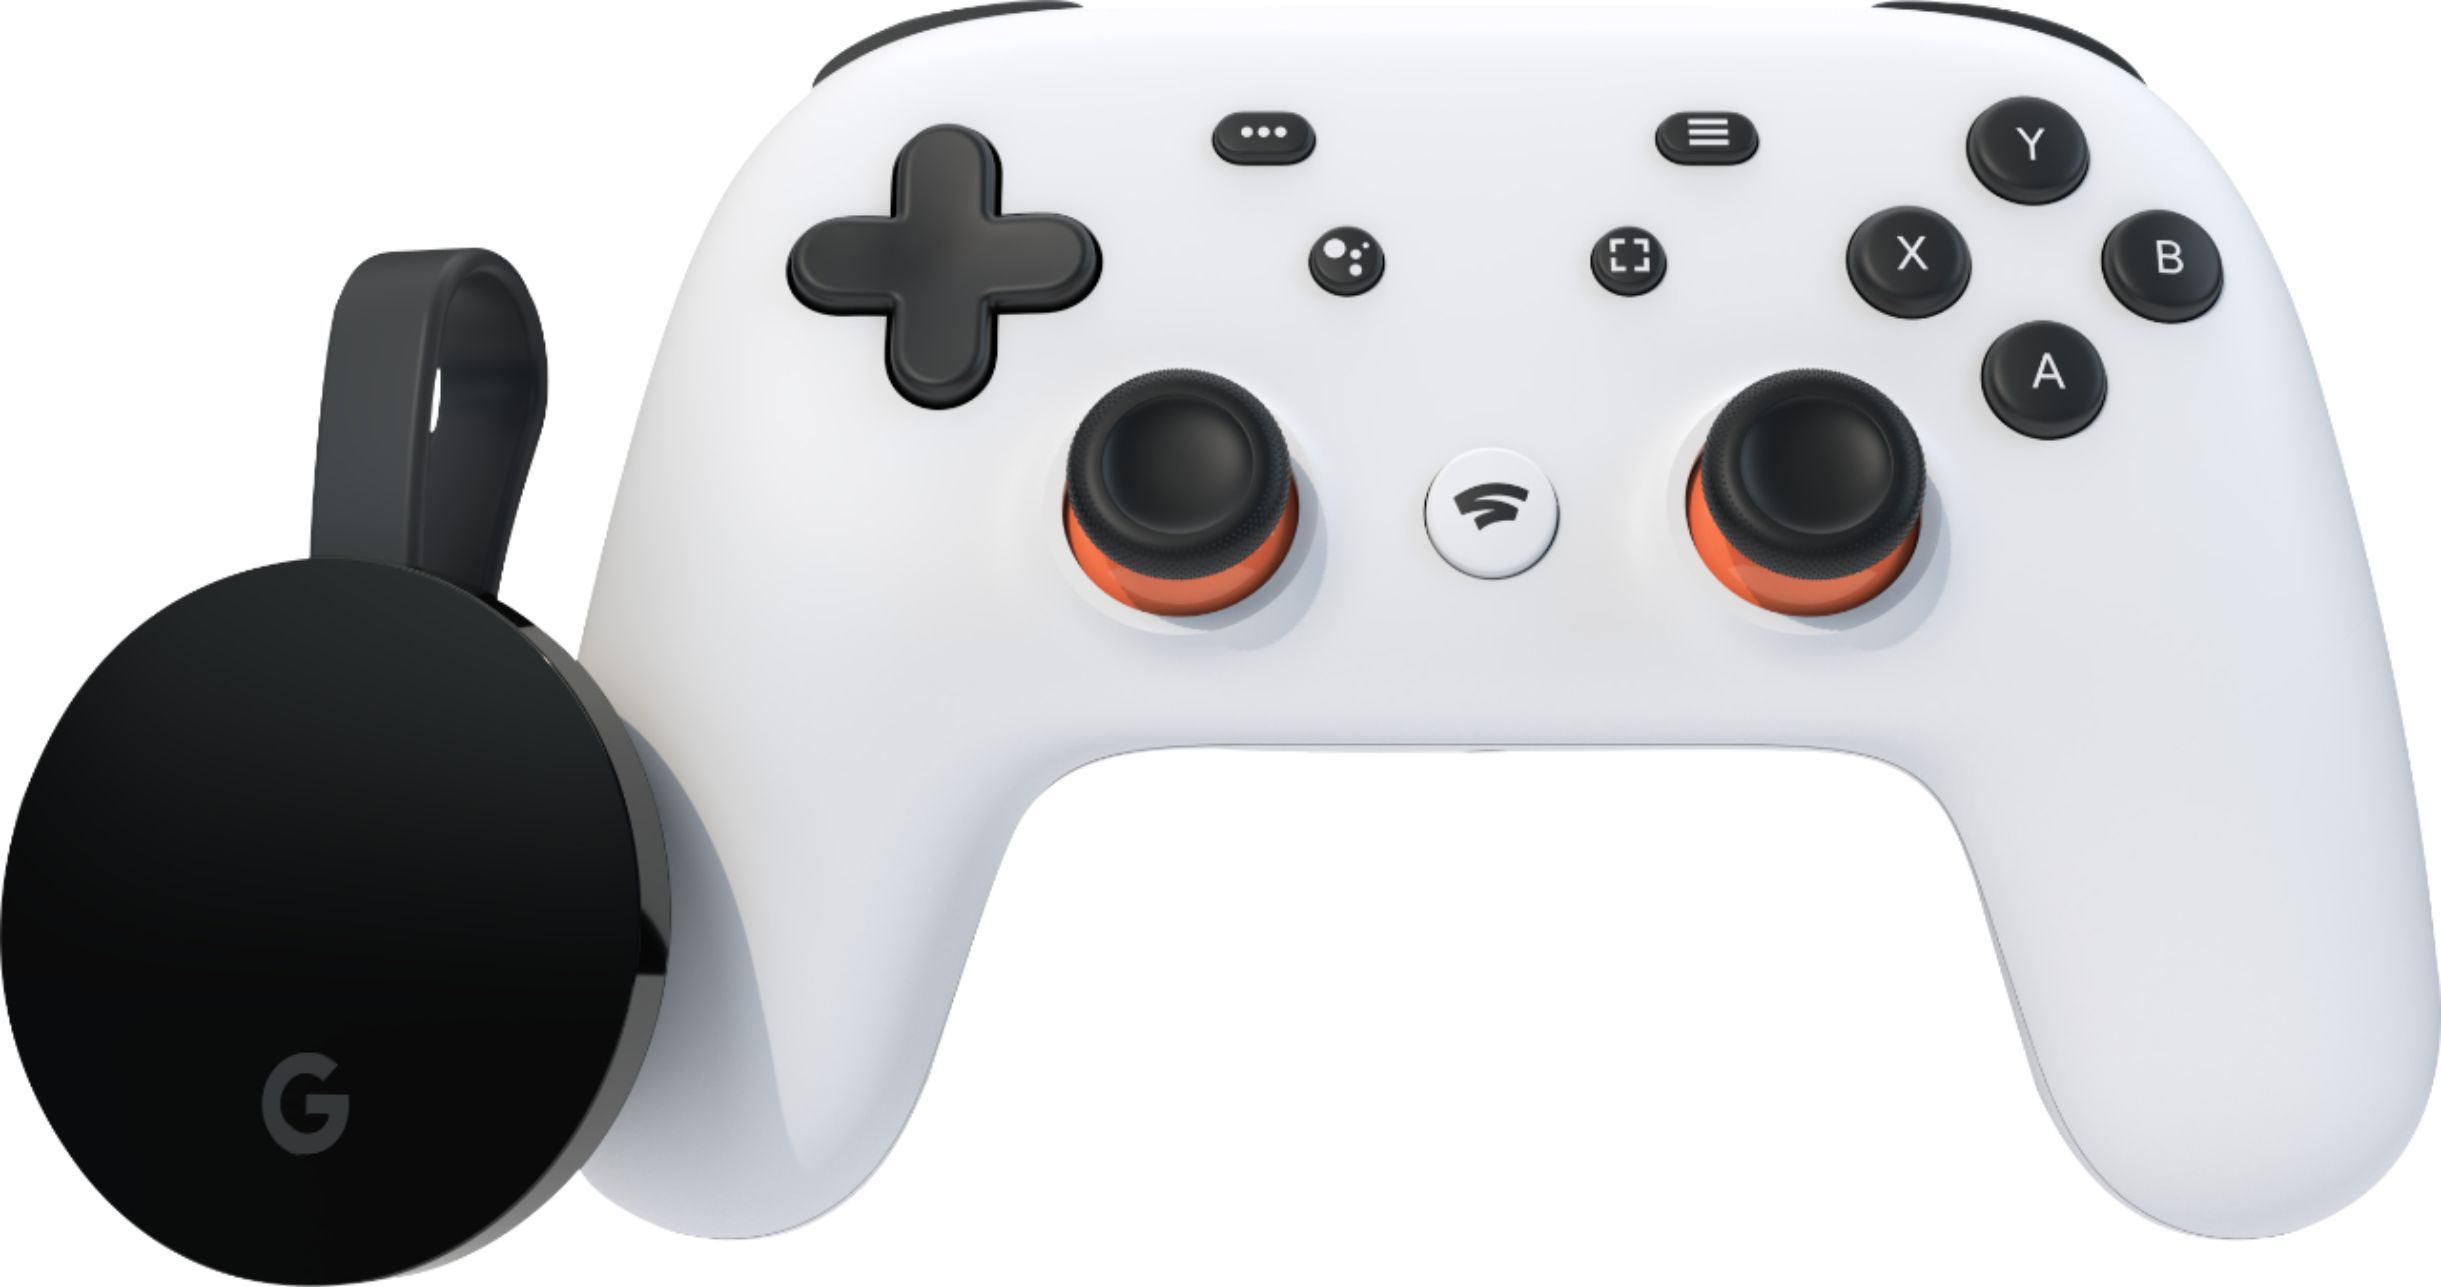 YouTube Premium Subscribers can Get a Stadia Gaming Bundle for Free, Compliments of Google